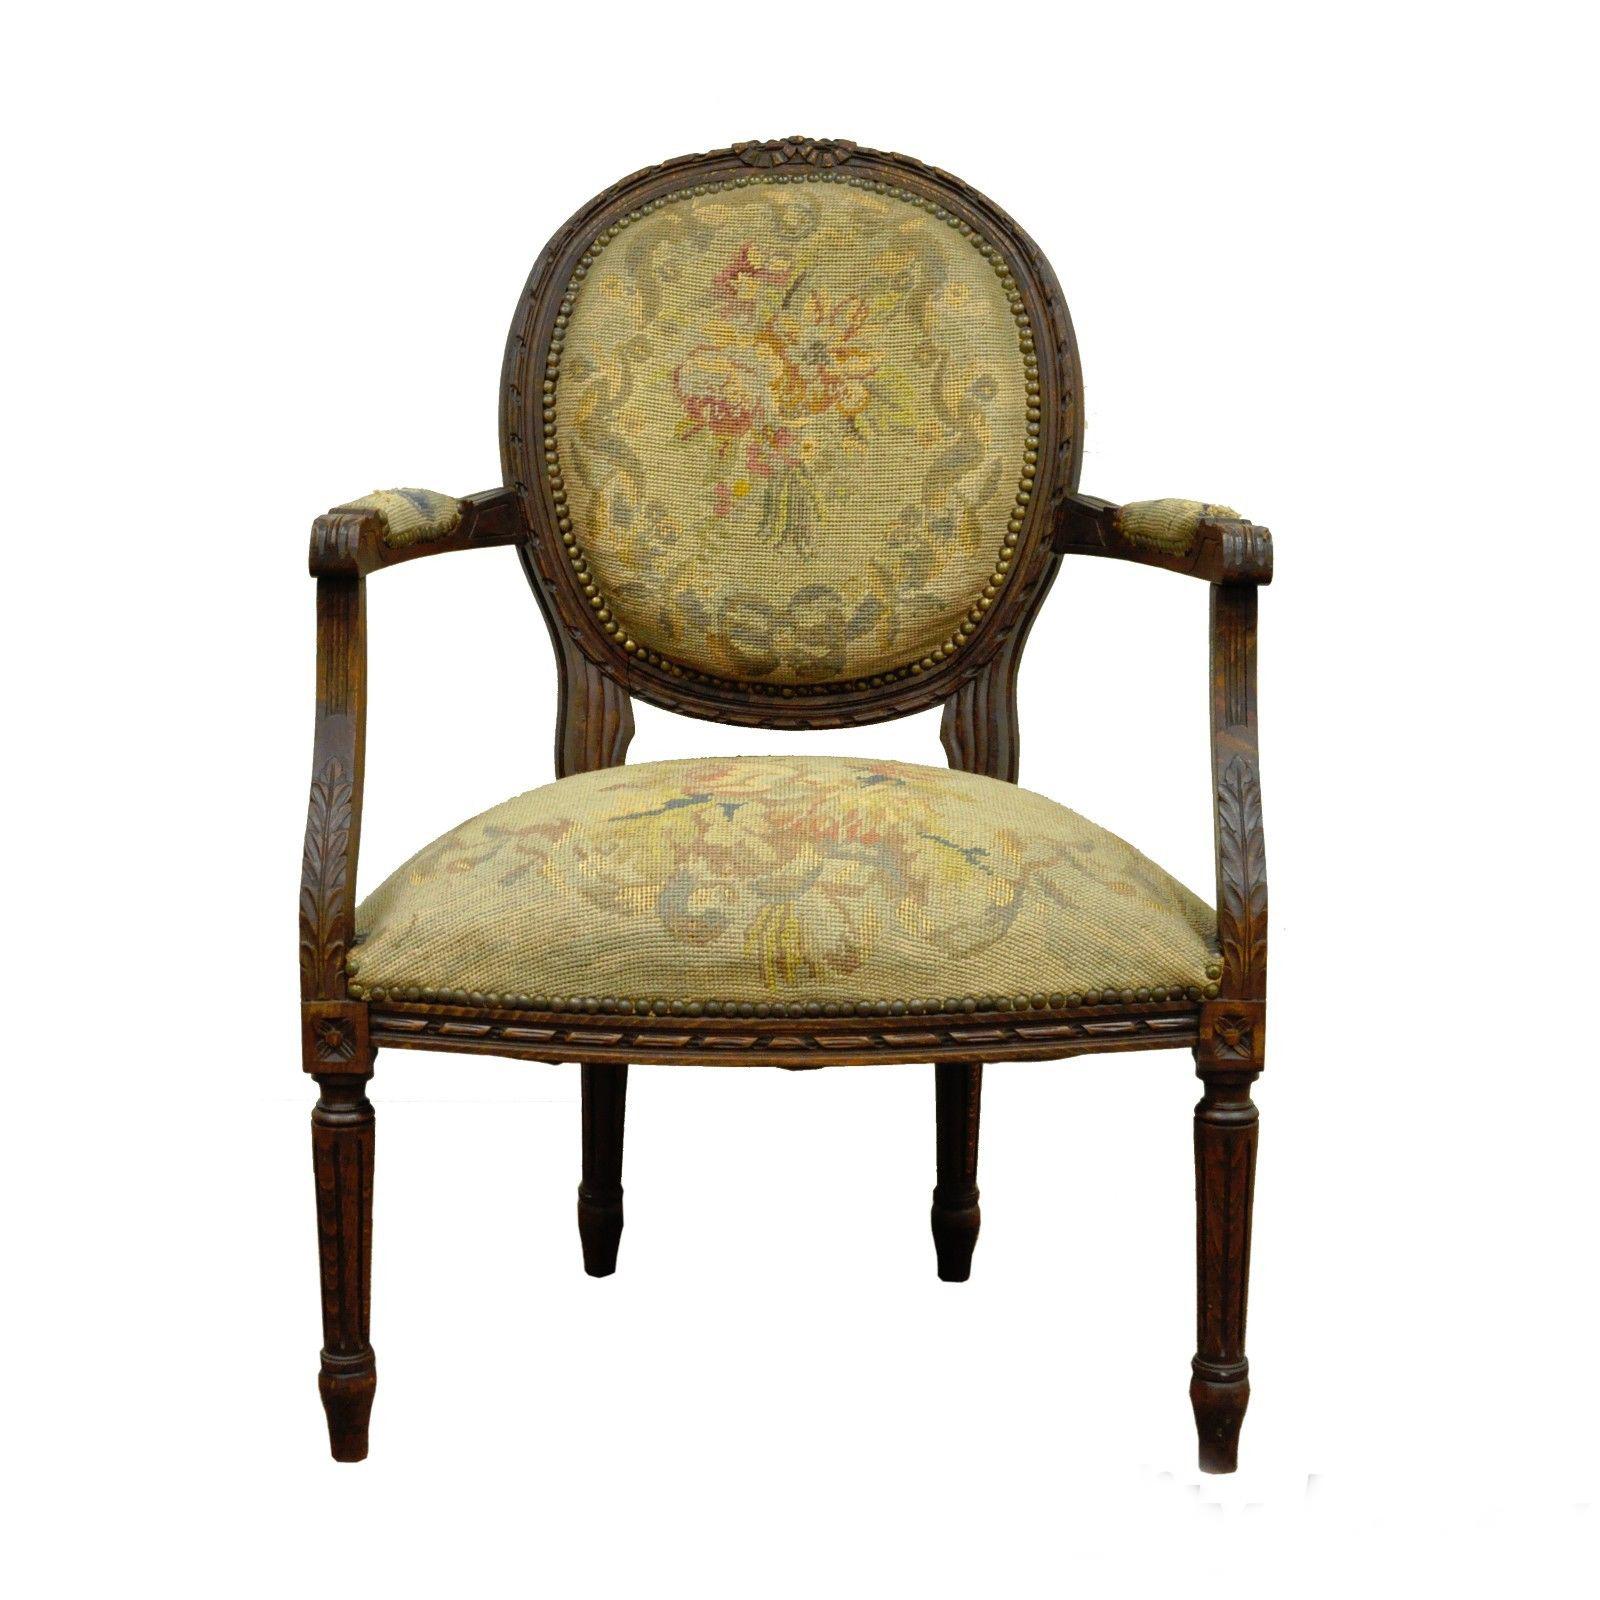 Antique 19th Century French Louis XVI Style Needlepoint Fireside Armchair B